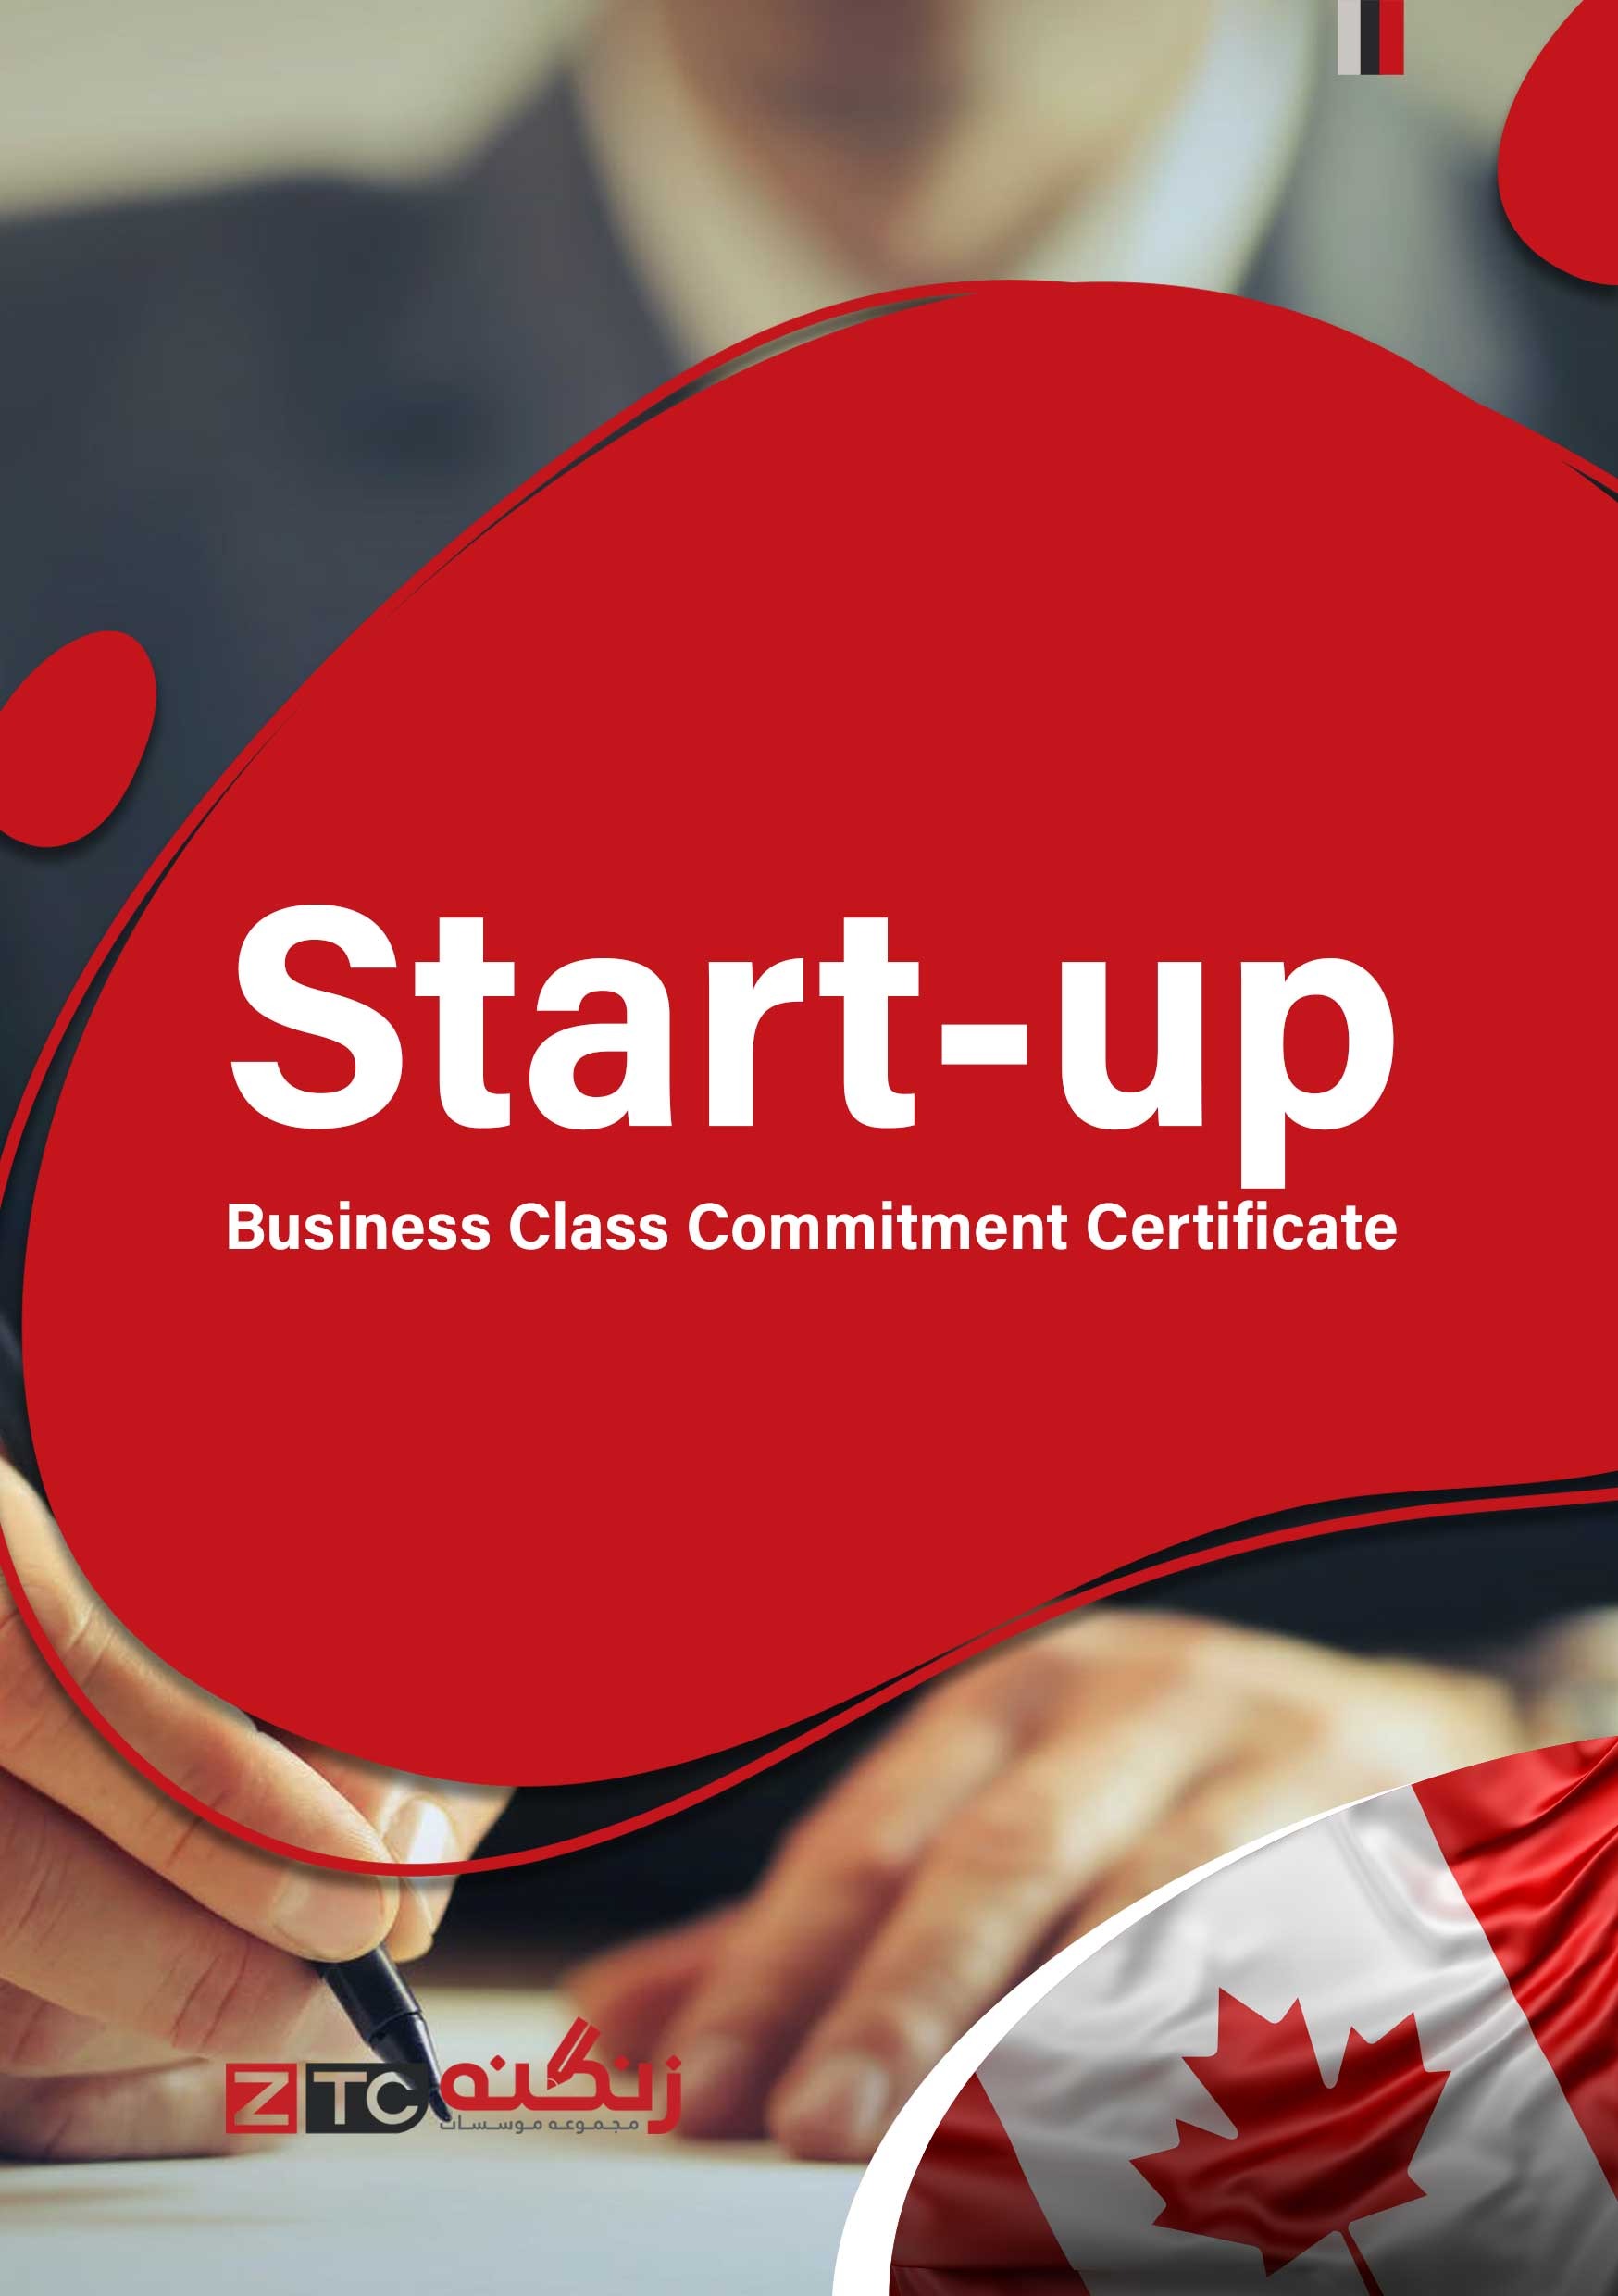 Start-up Business Class Commitment Certificate